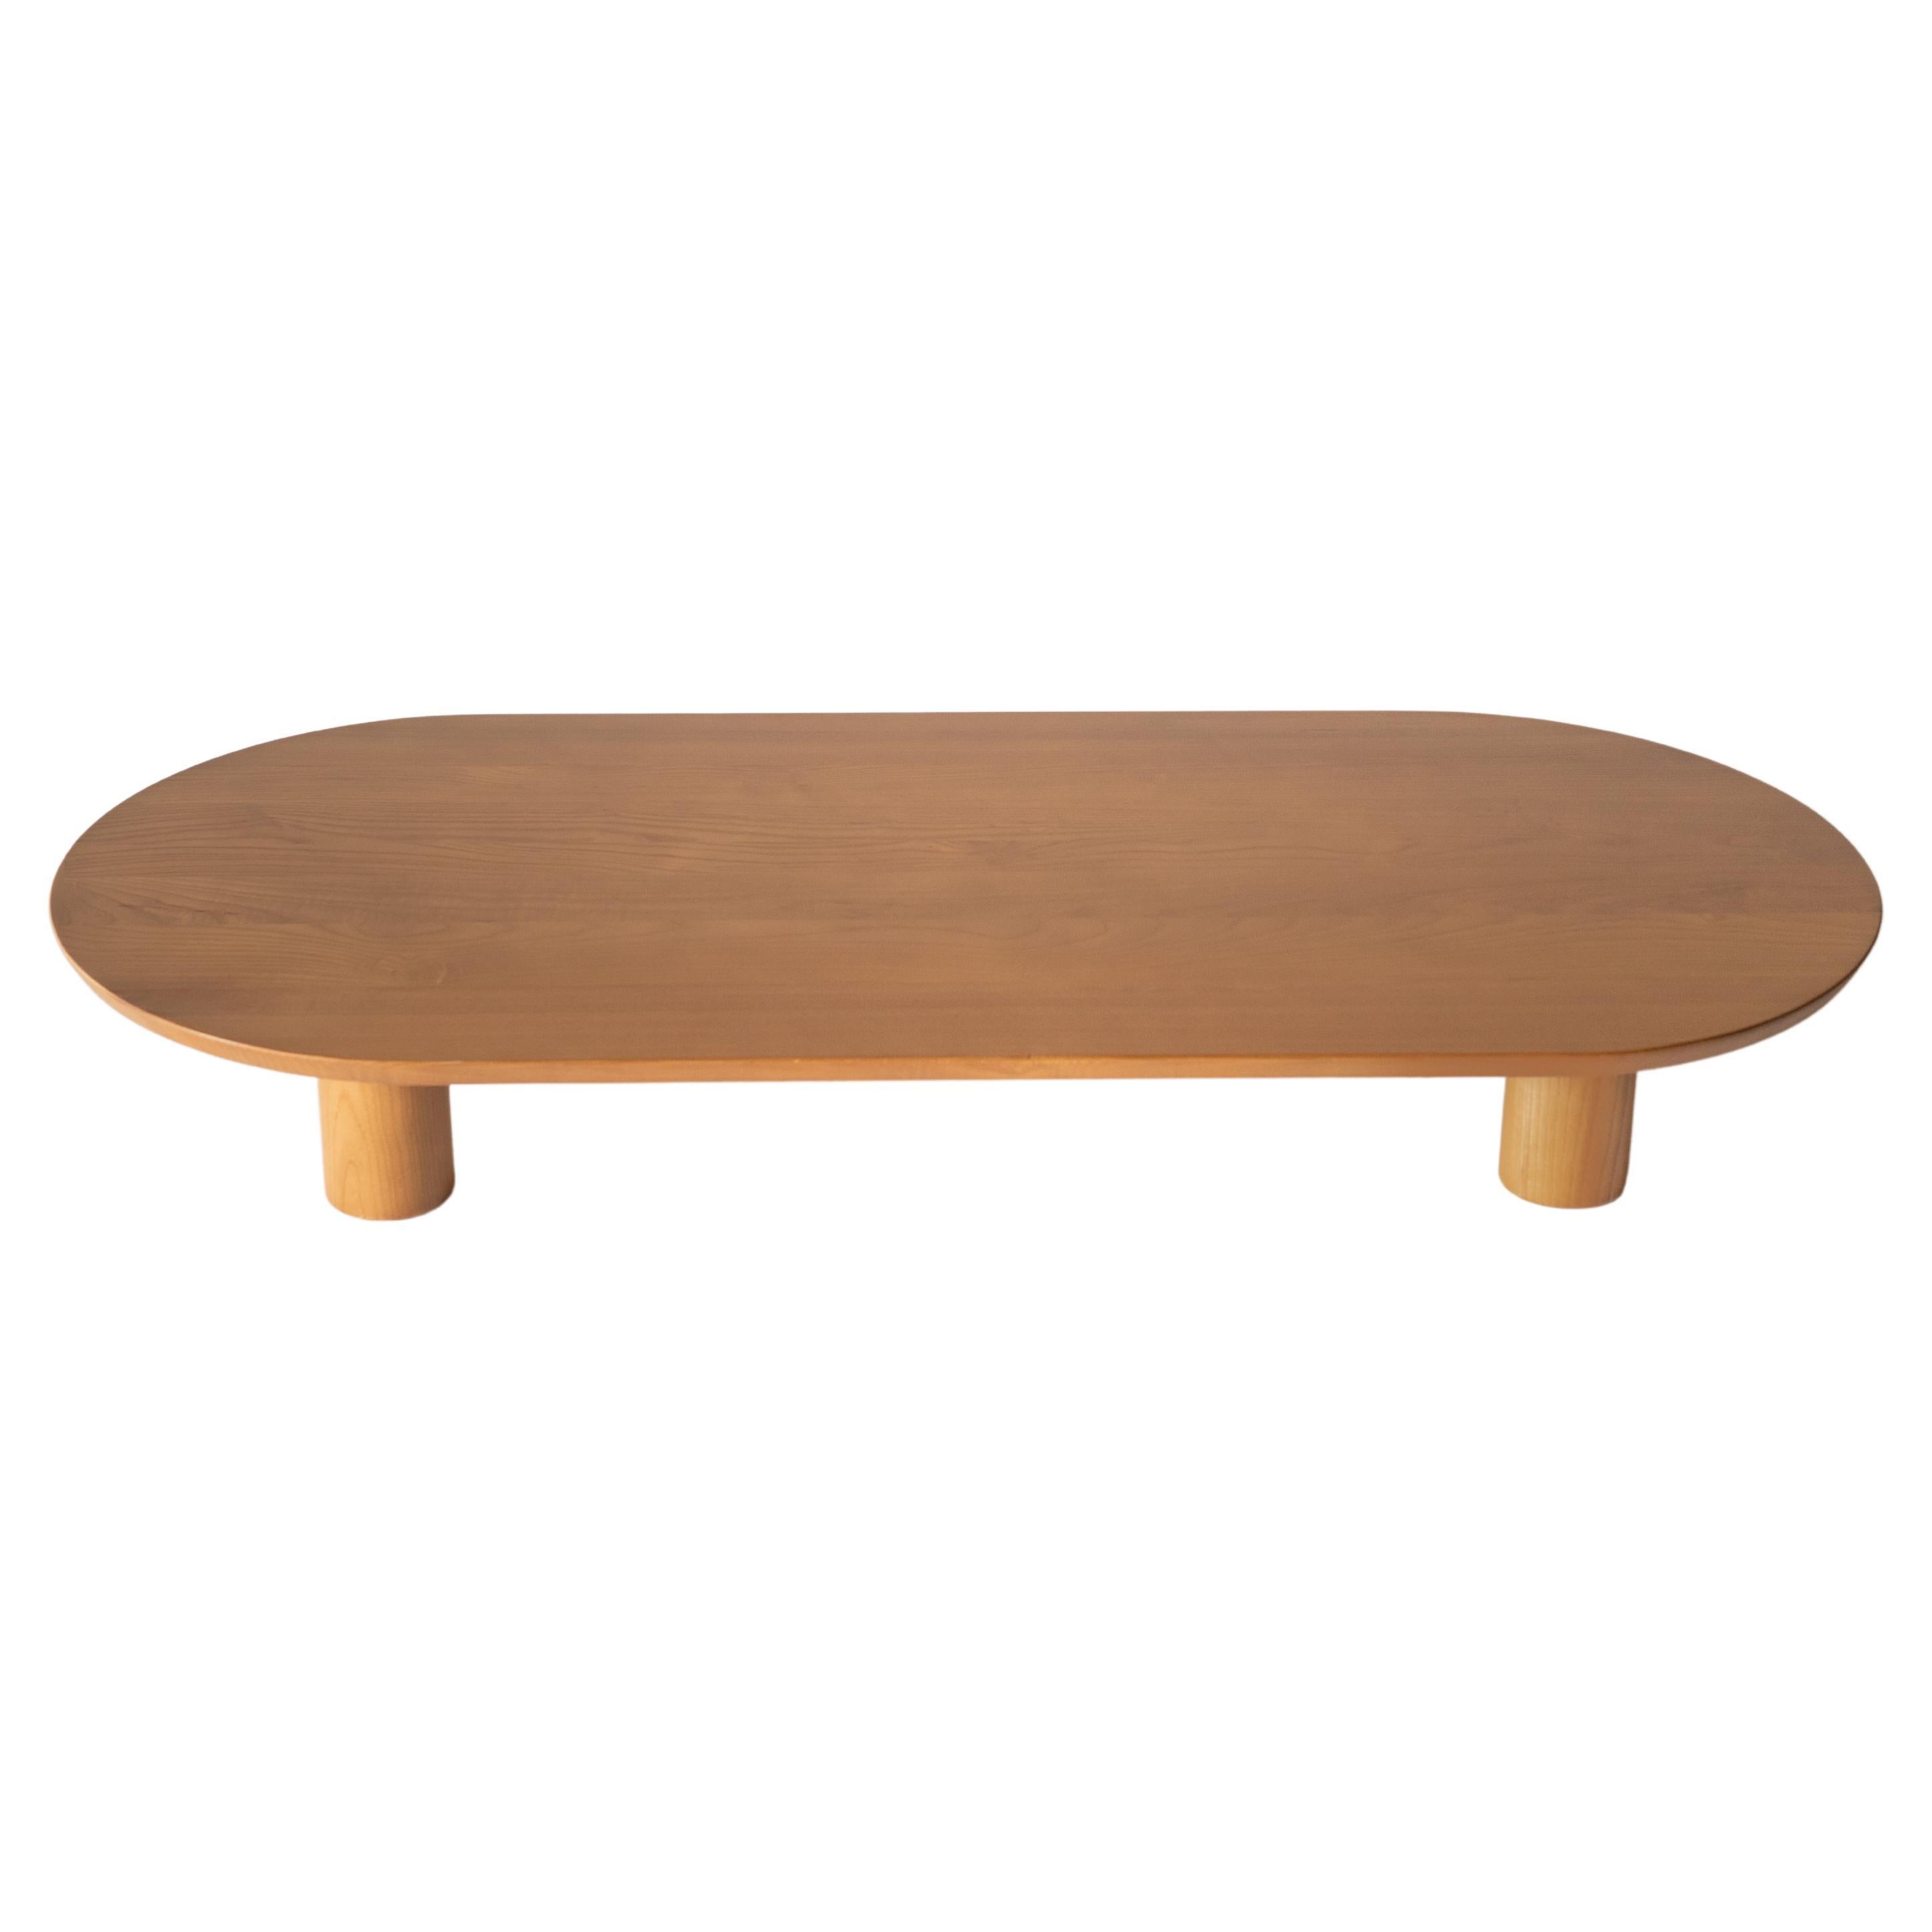 Ovie Coffee Table by Sun at Six, Sienna Coffee Table in Wood For Sale